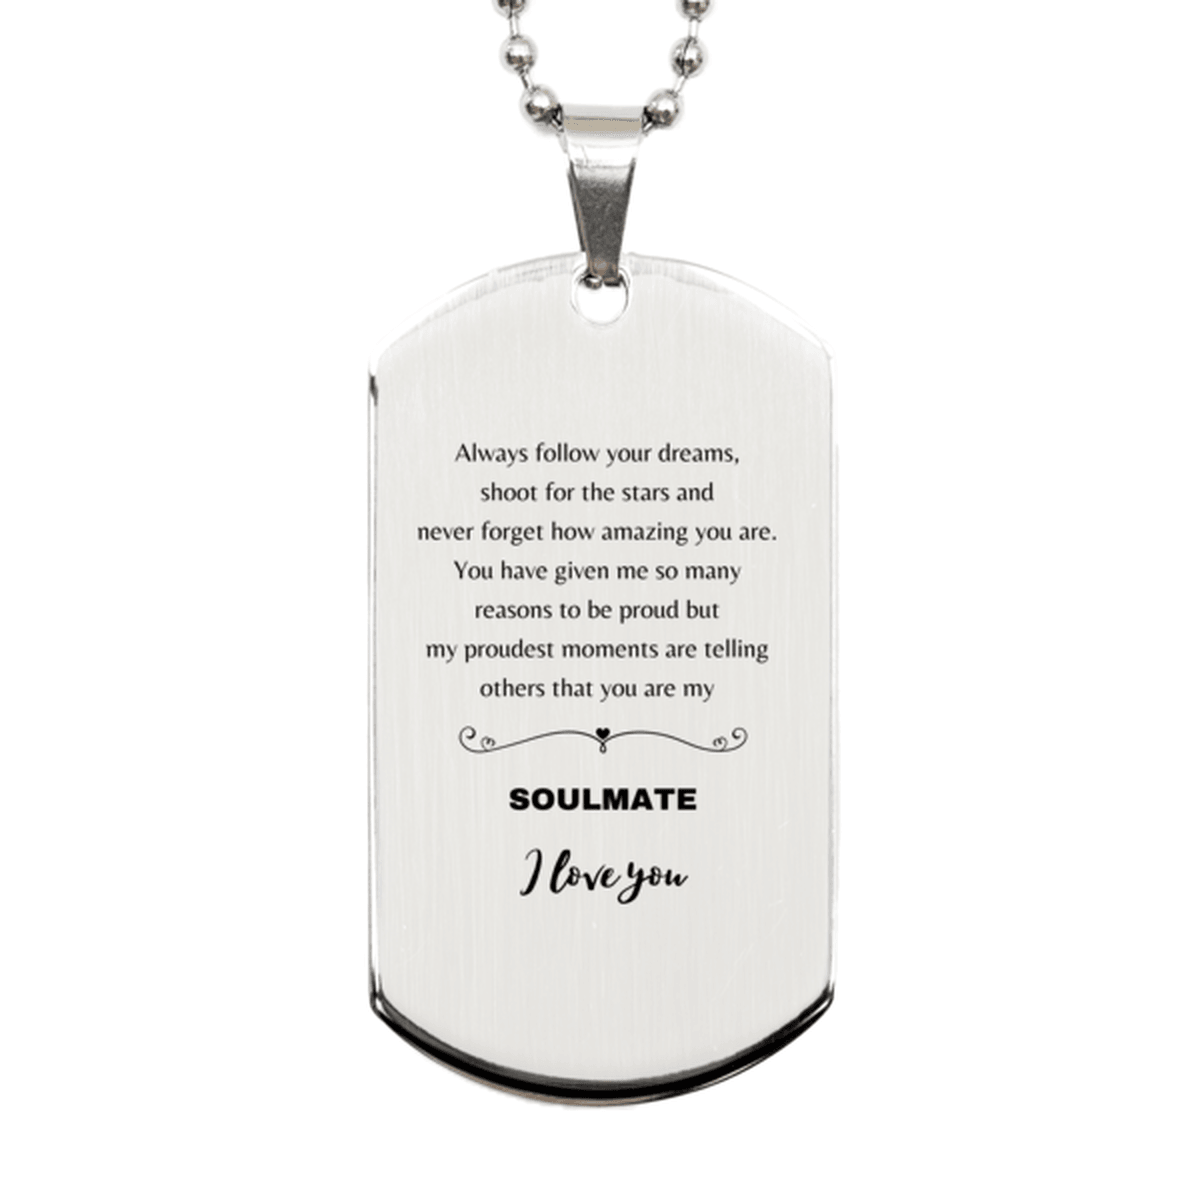 Motivational Soulmate Engraved Silver Dog Tag Necklace - Always follow your dreams, never forget how amazing you are- Birthday, Christmas Holiday Gifts - Mallard Moon Gift Shop